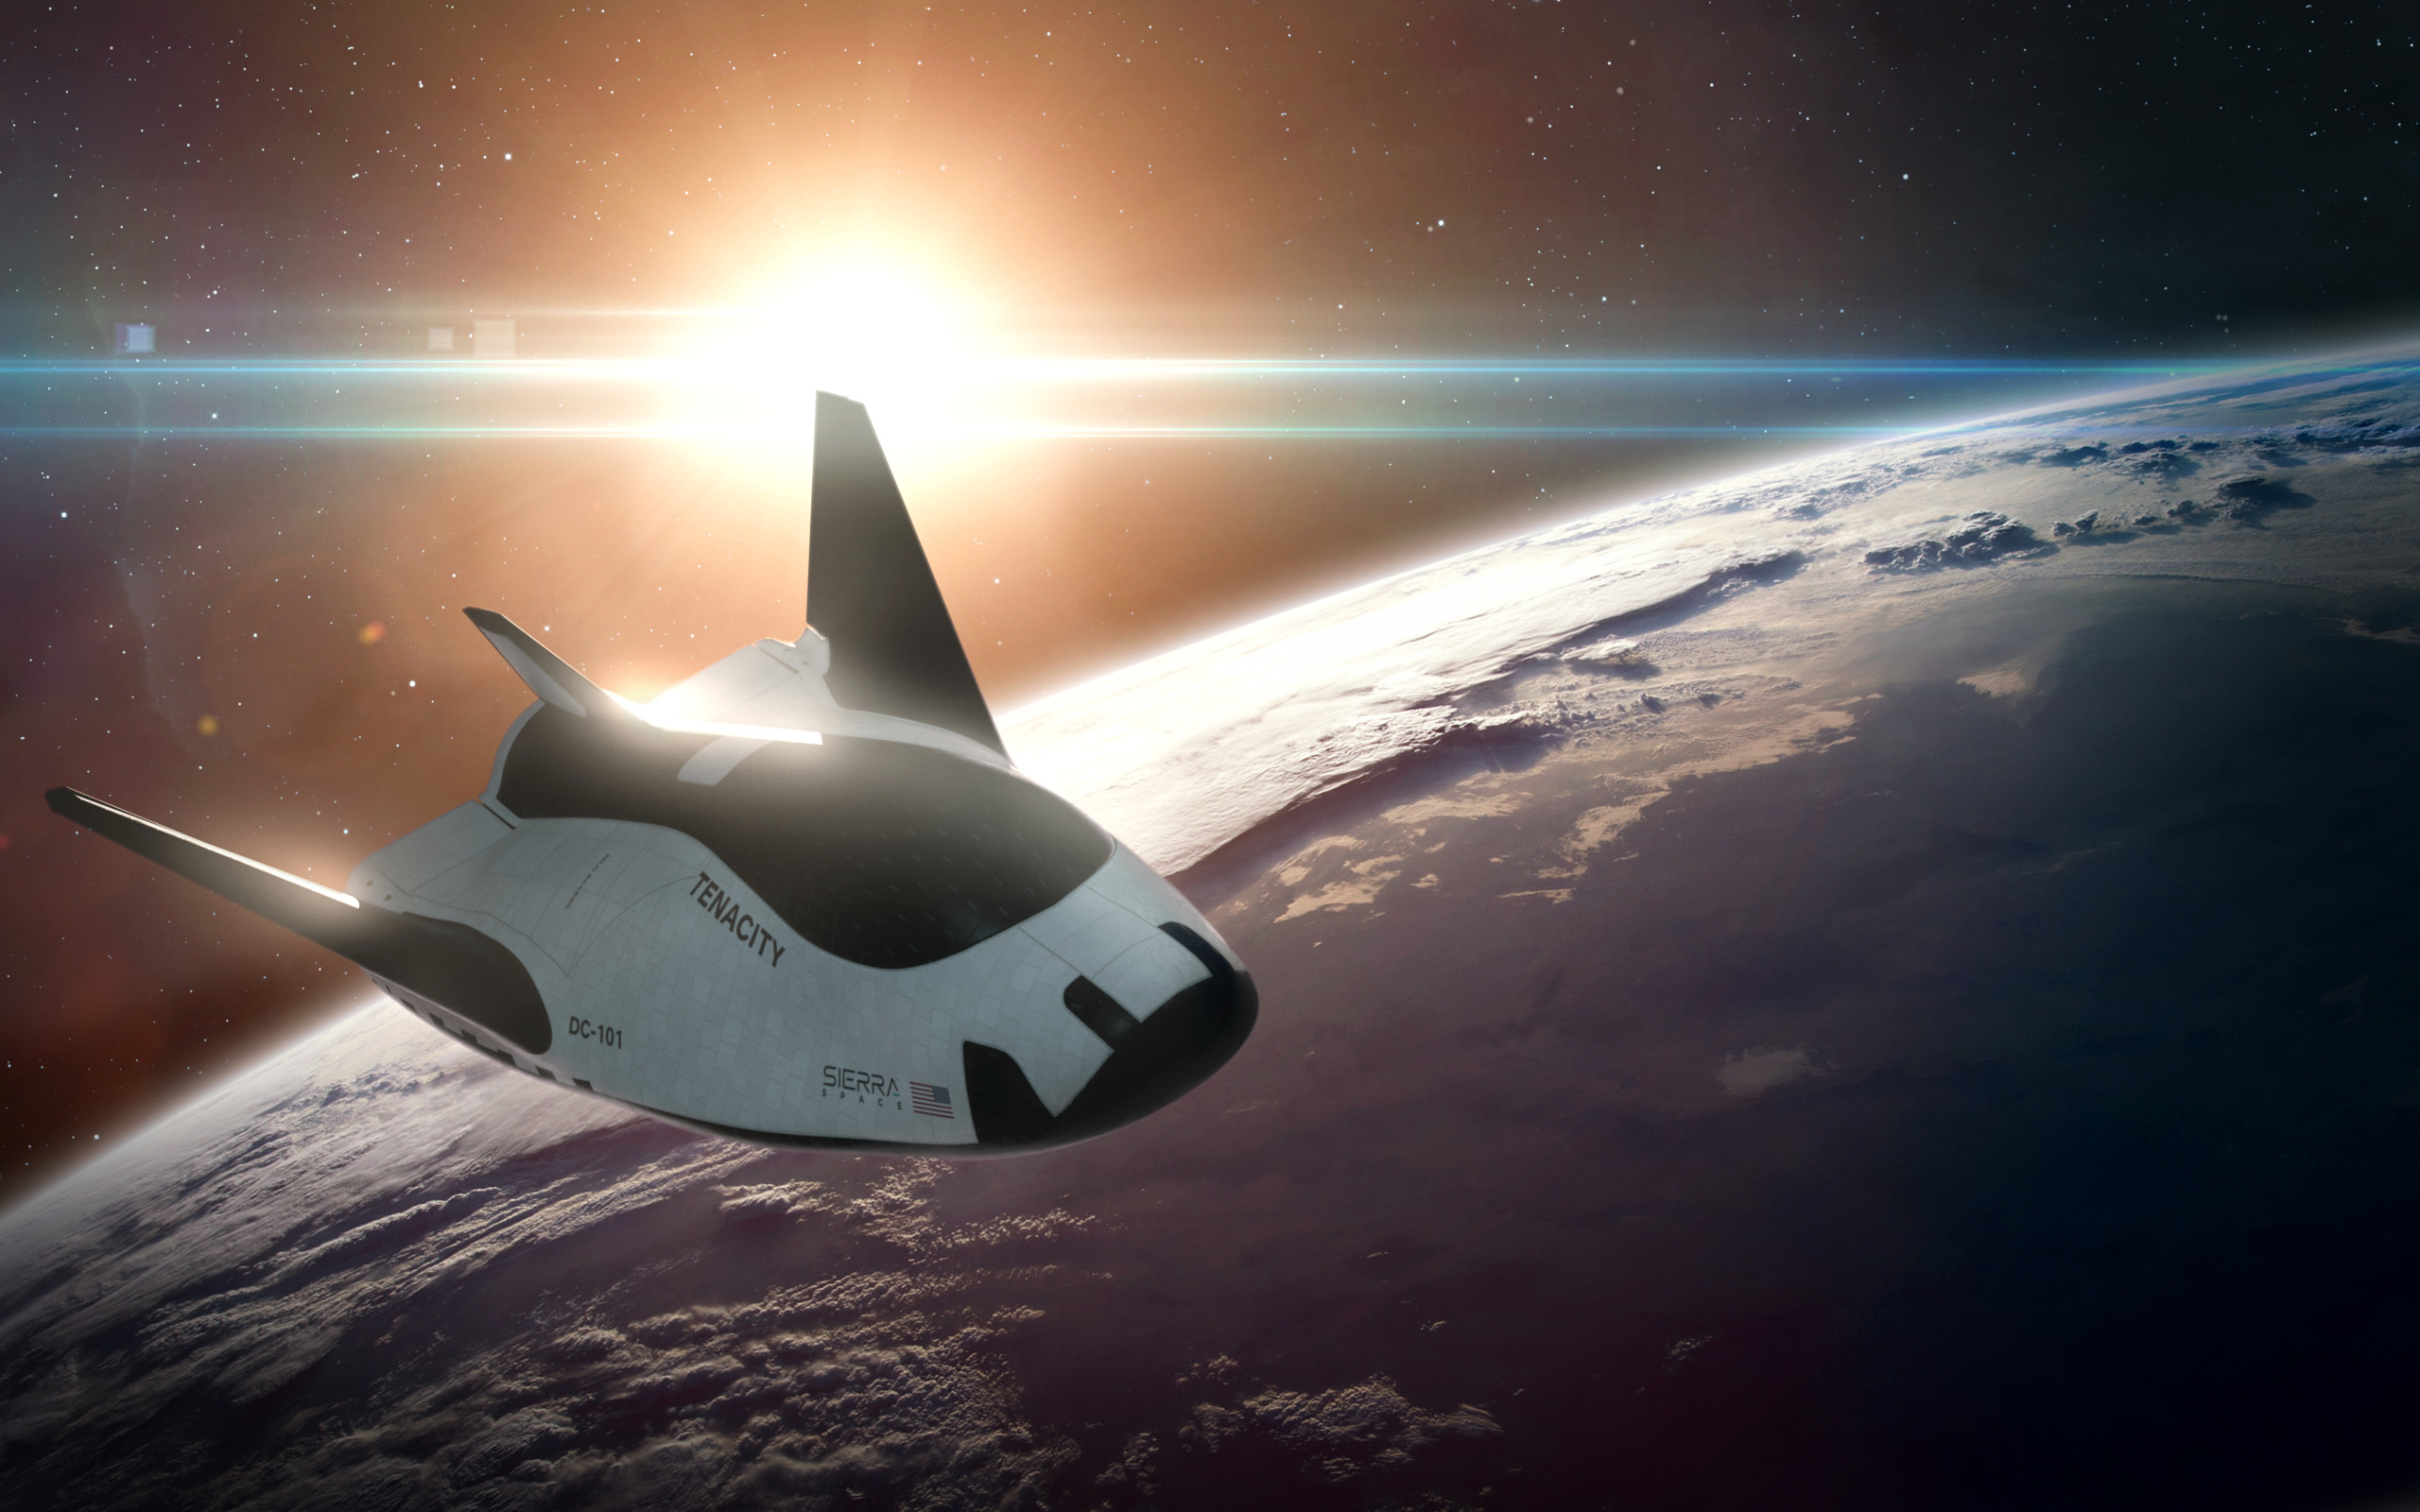 Sierra Space Powers up Dream Chaser in Preparation for Maiden Flight - Payload